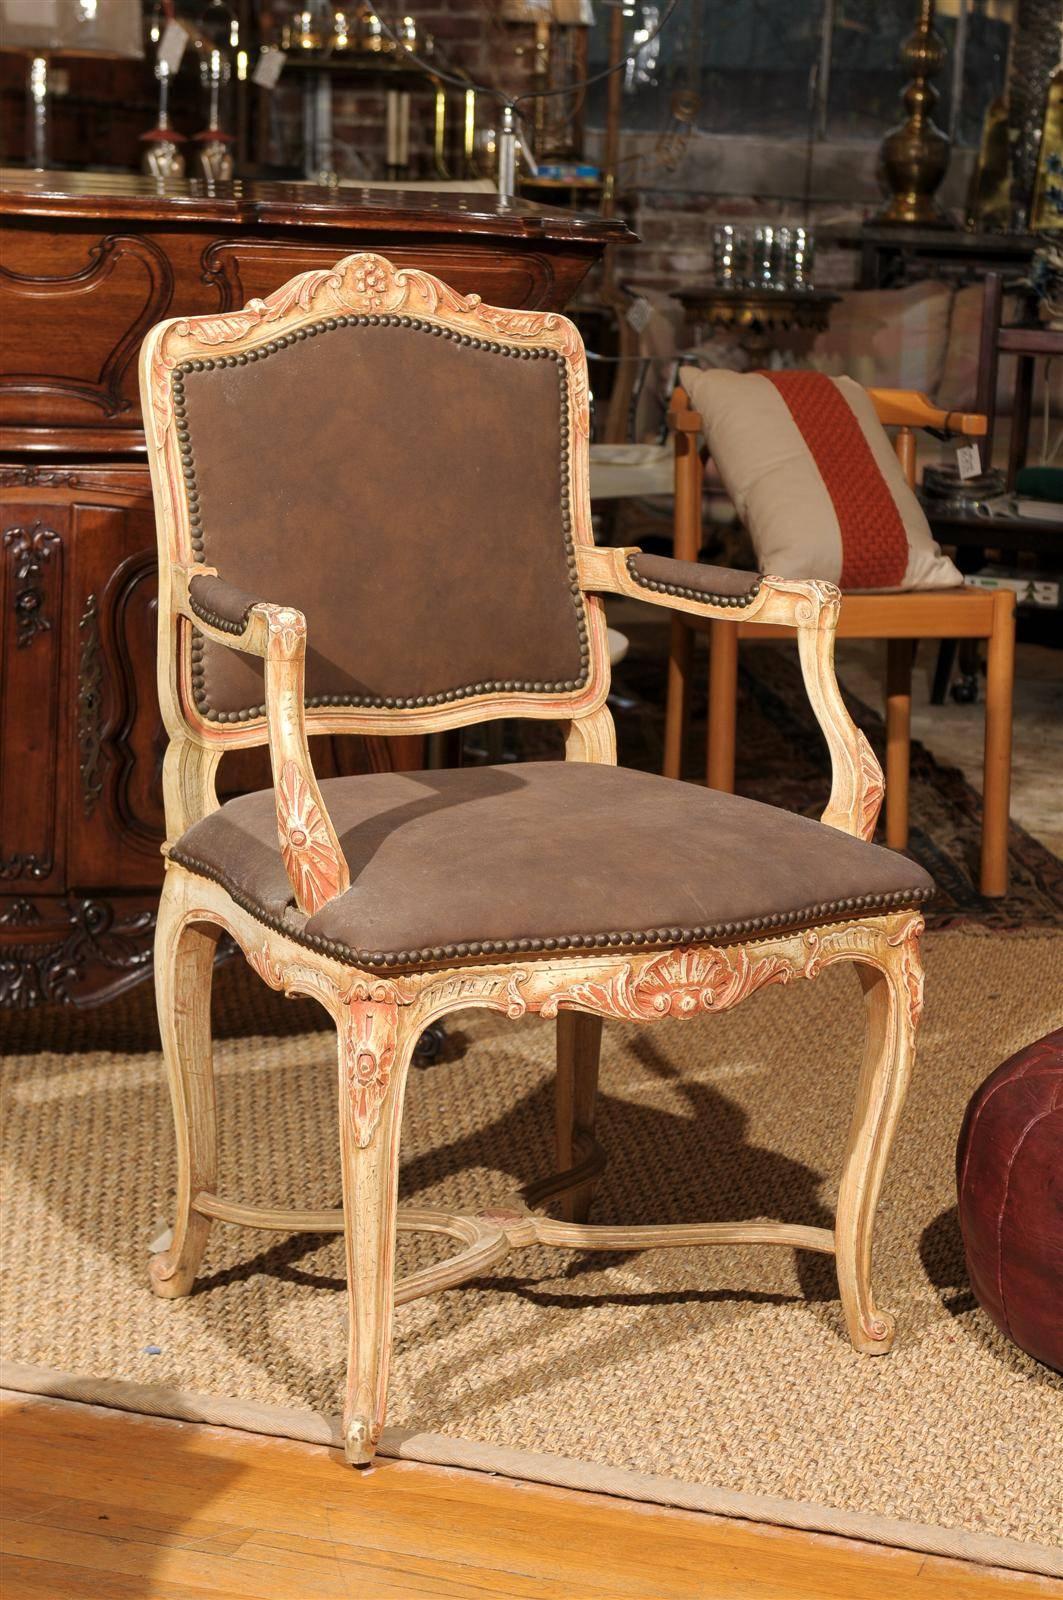 20th Century hand carved and painted wooden fauteuil or side chair in the Louis XV style with the seat, back, and arms upholstered in chocolate brown suede and decorated with nailheads.